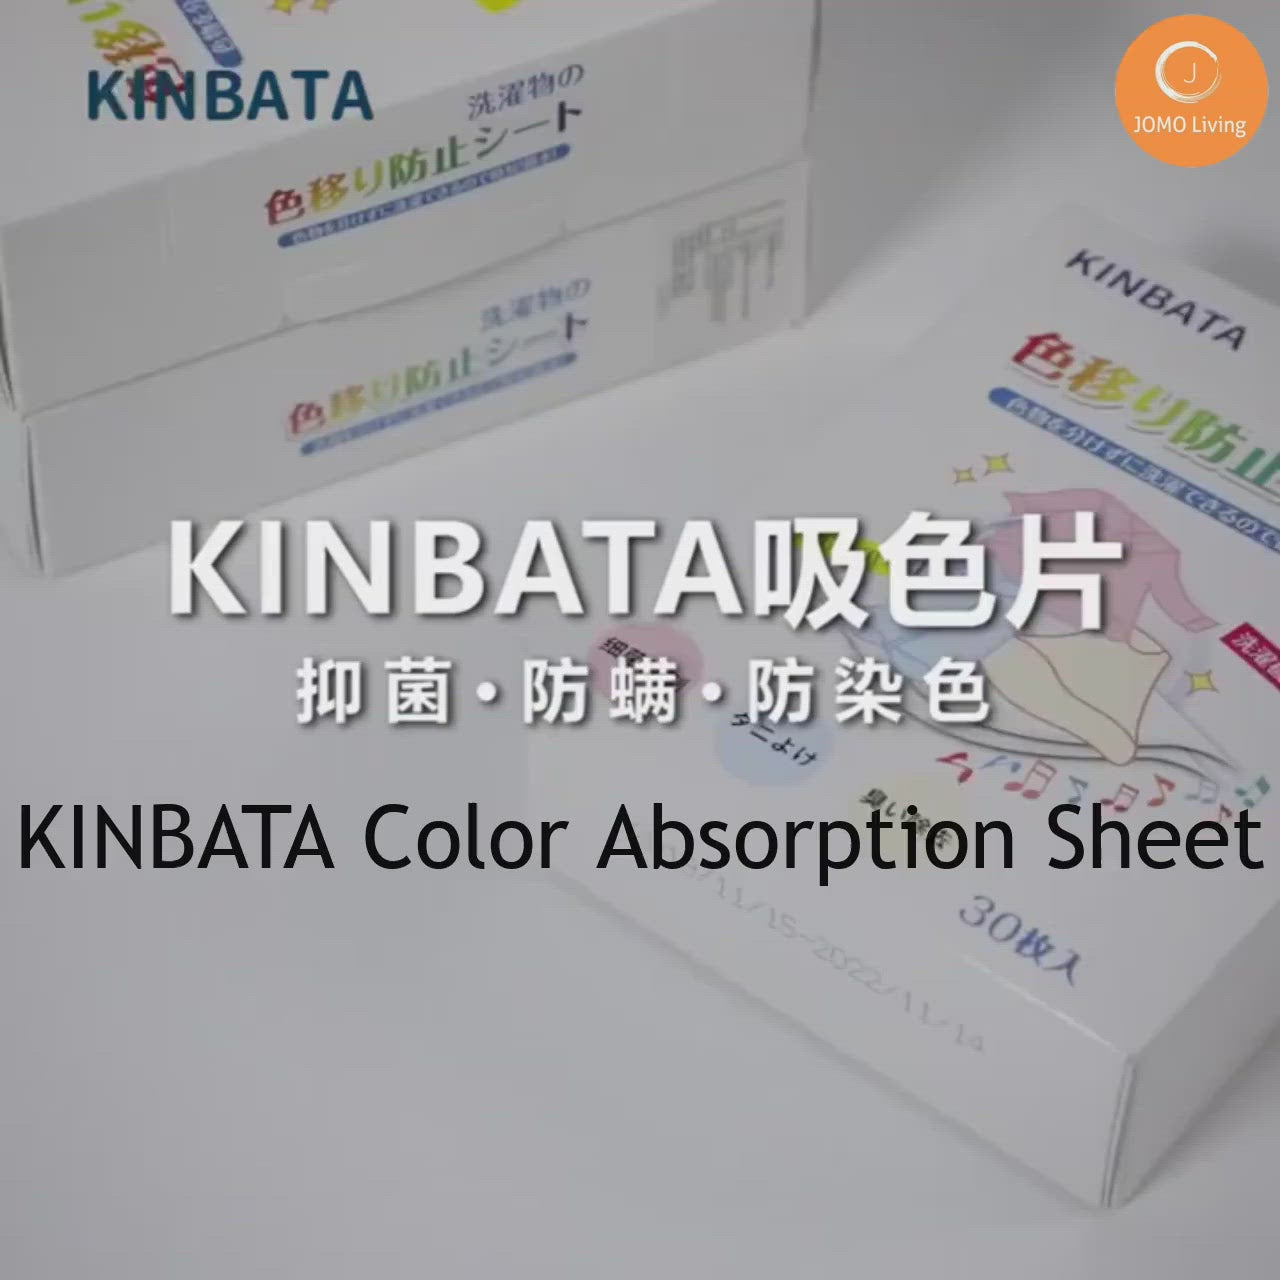 Get Kinbata Anti-stain Laundry Paper Clothes Color Absorption Sheet  Delivered